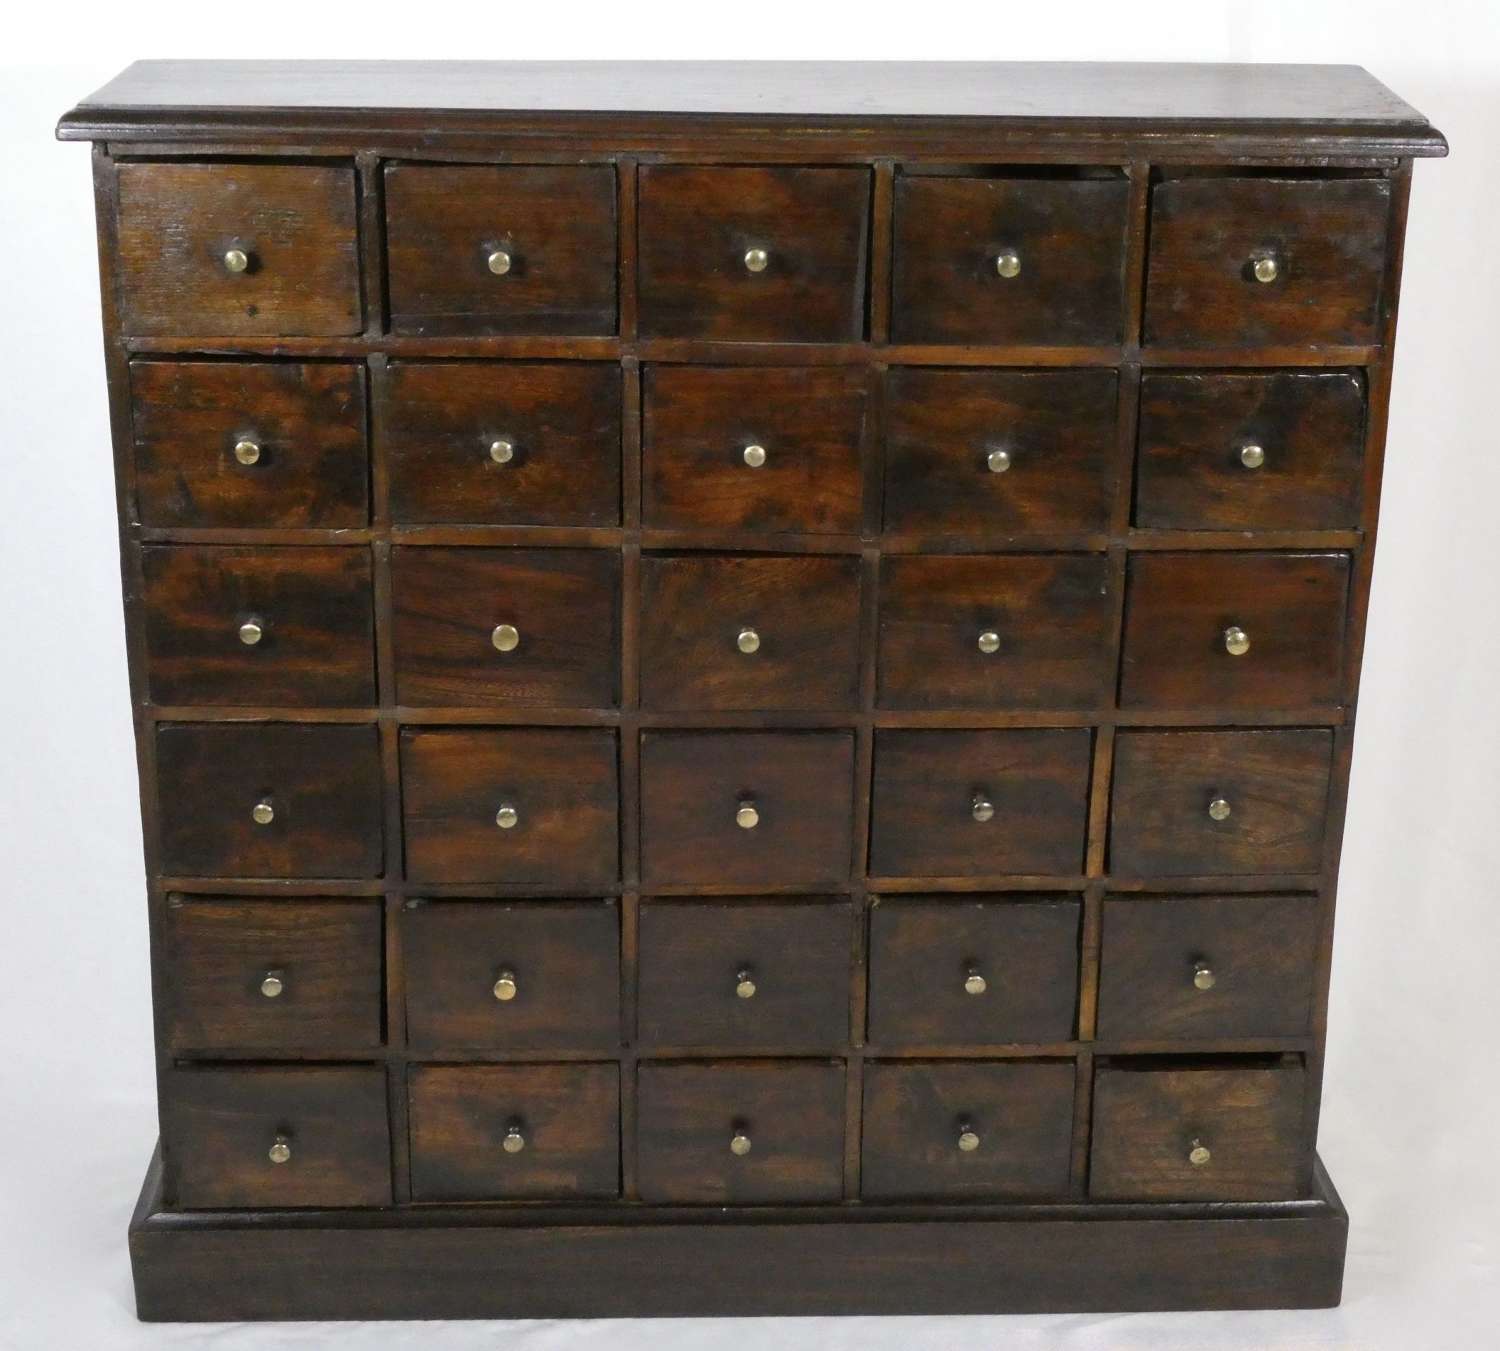 Early 19th Century Apothecary Drawers